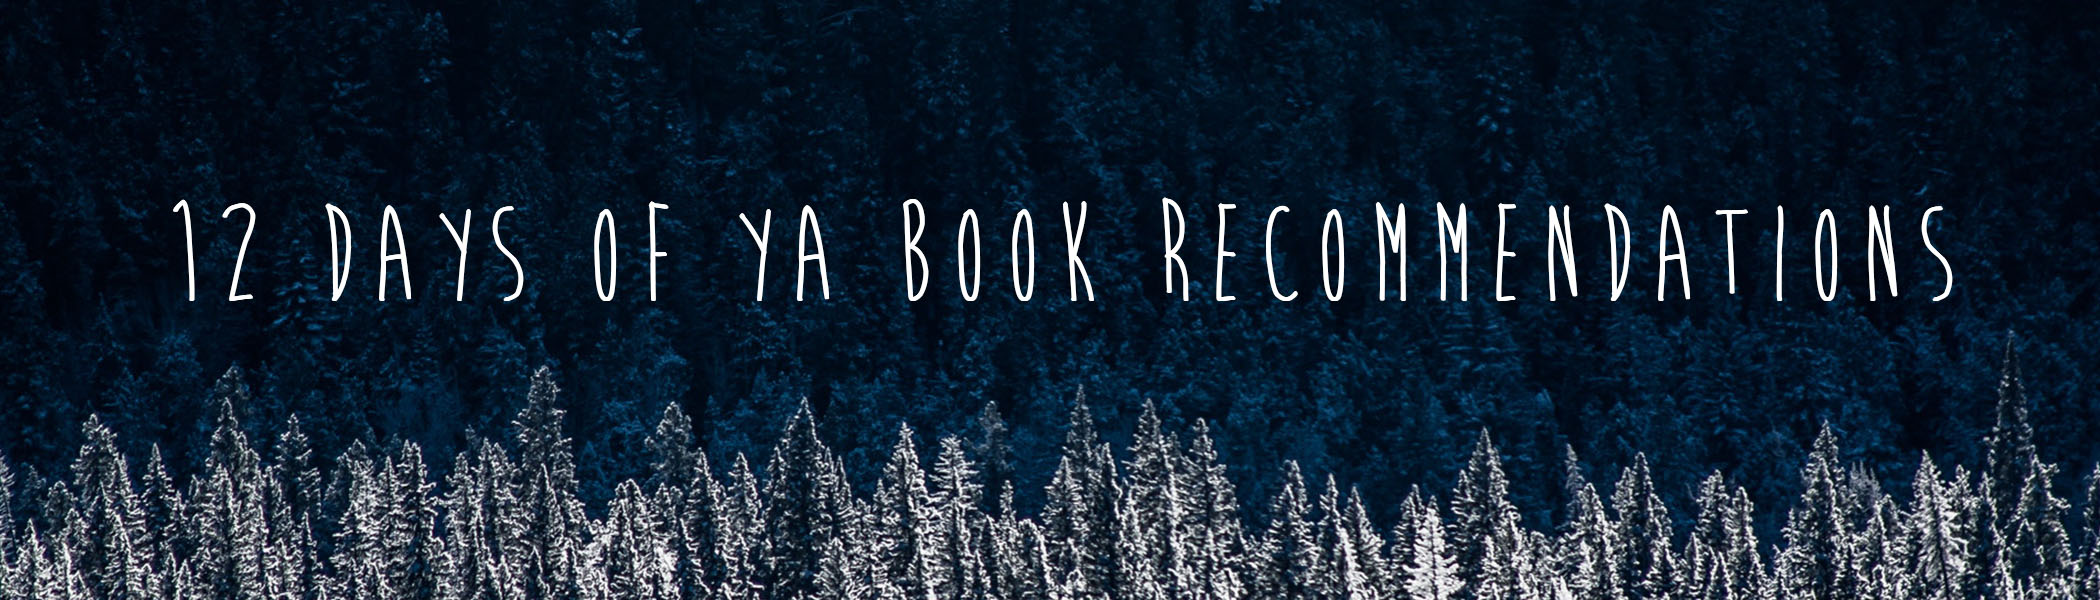 12 Days of YA Book Recommendations